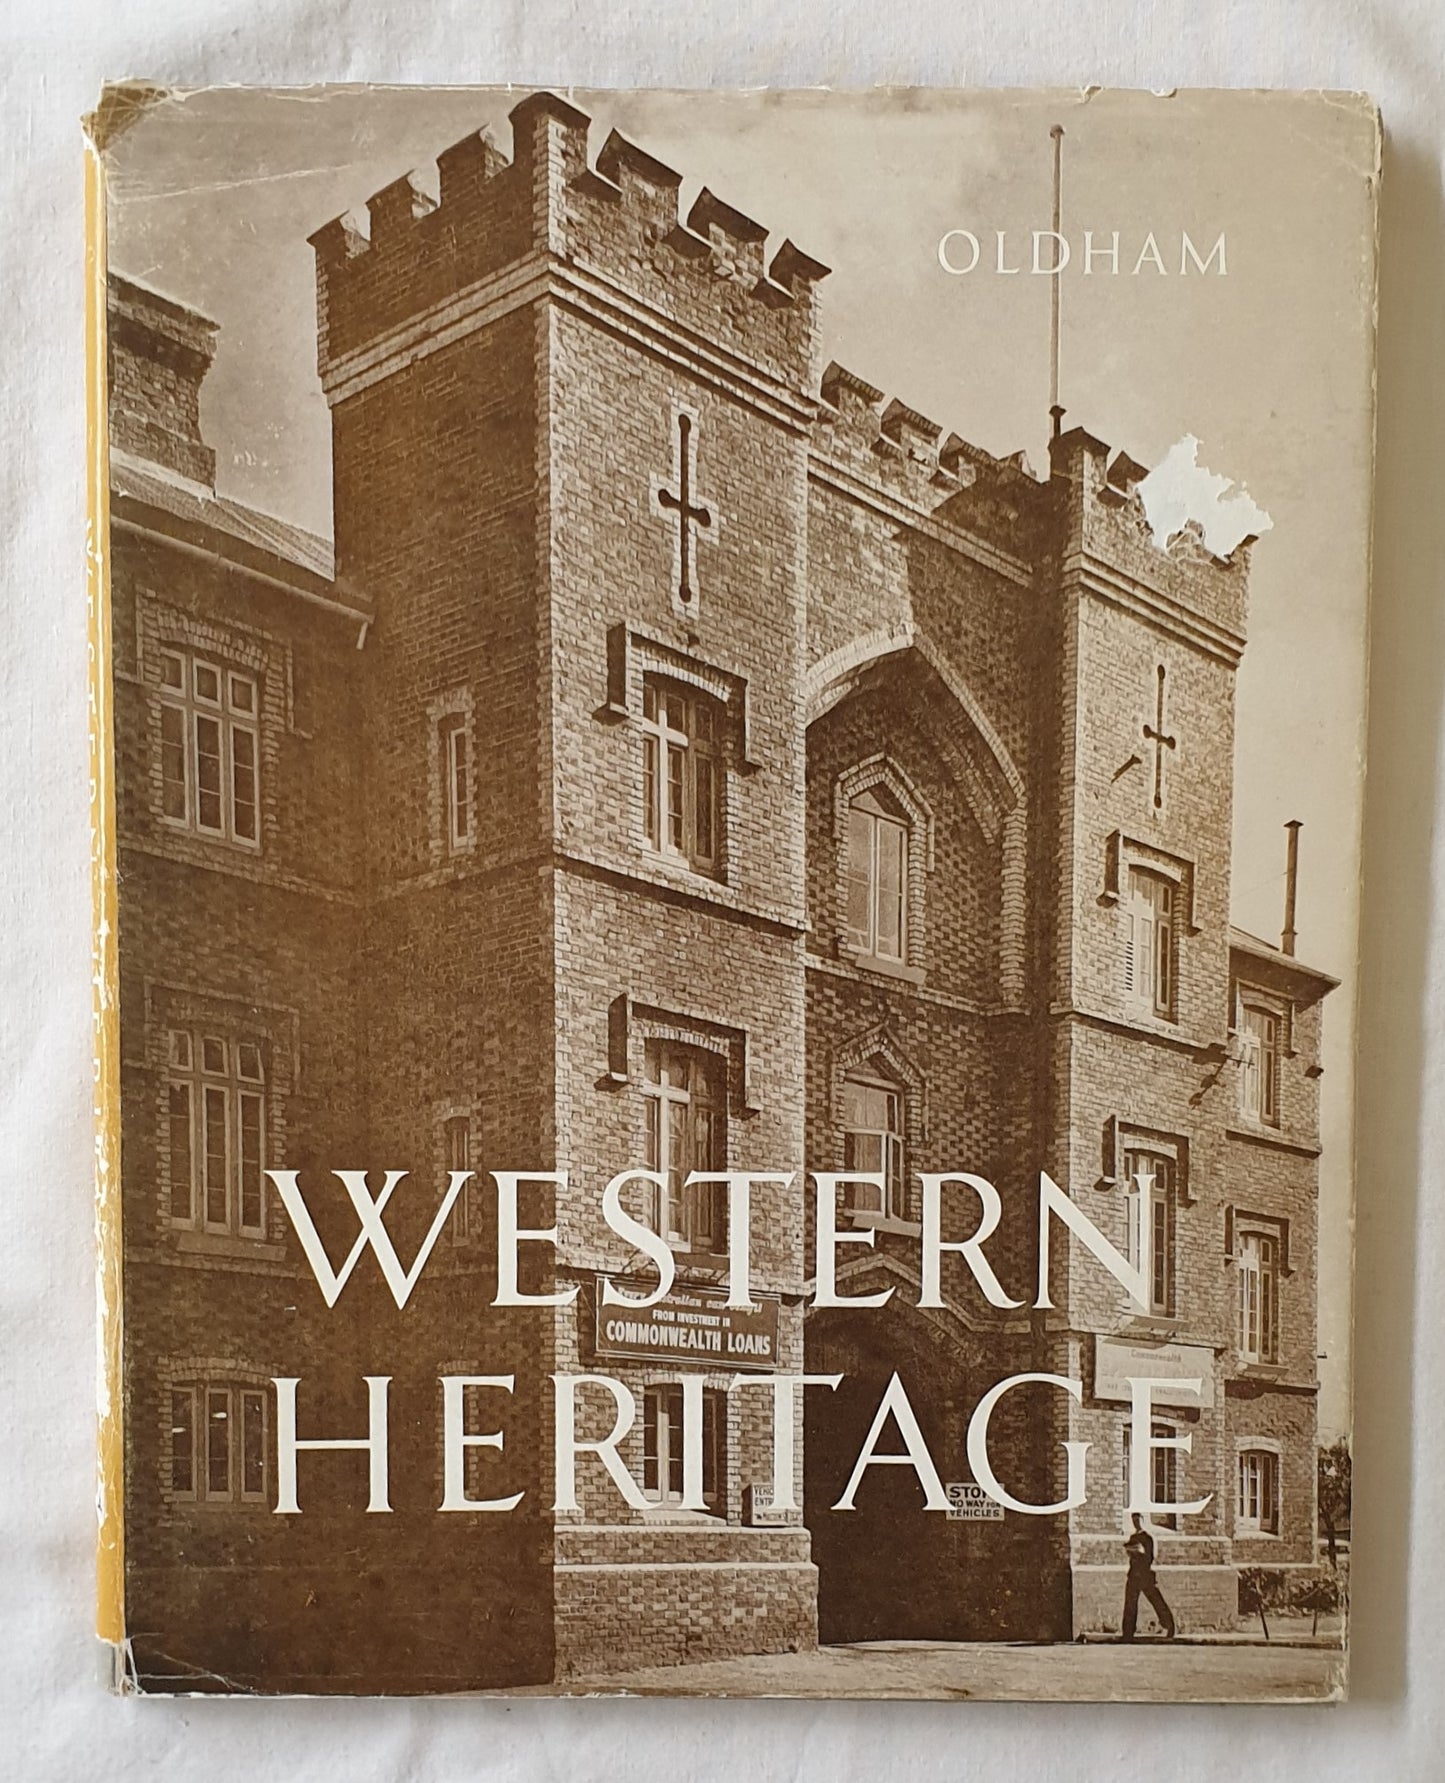 Western Heritage by Ray and John Oldham